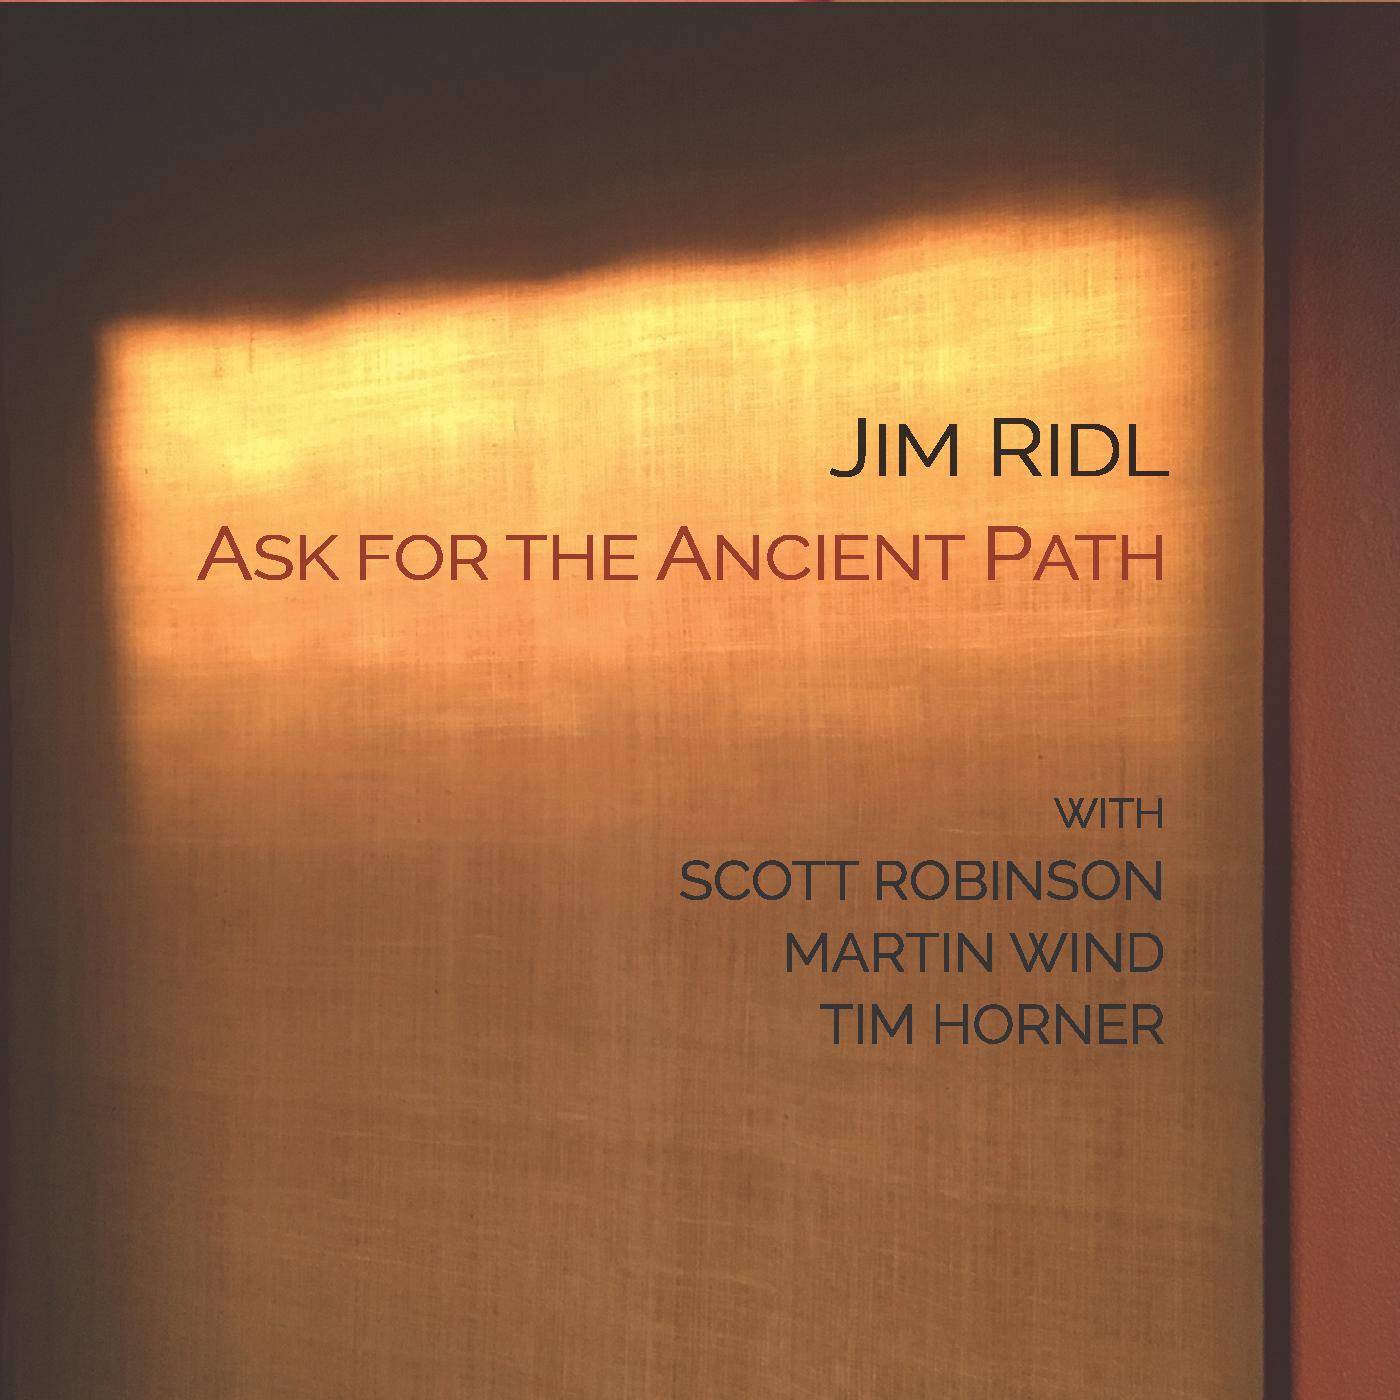 Jim Ridl - Ask for the Ancient Path (feat. Scott Robinson, Martin Wind & Tim Horner)